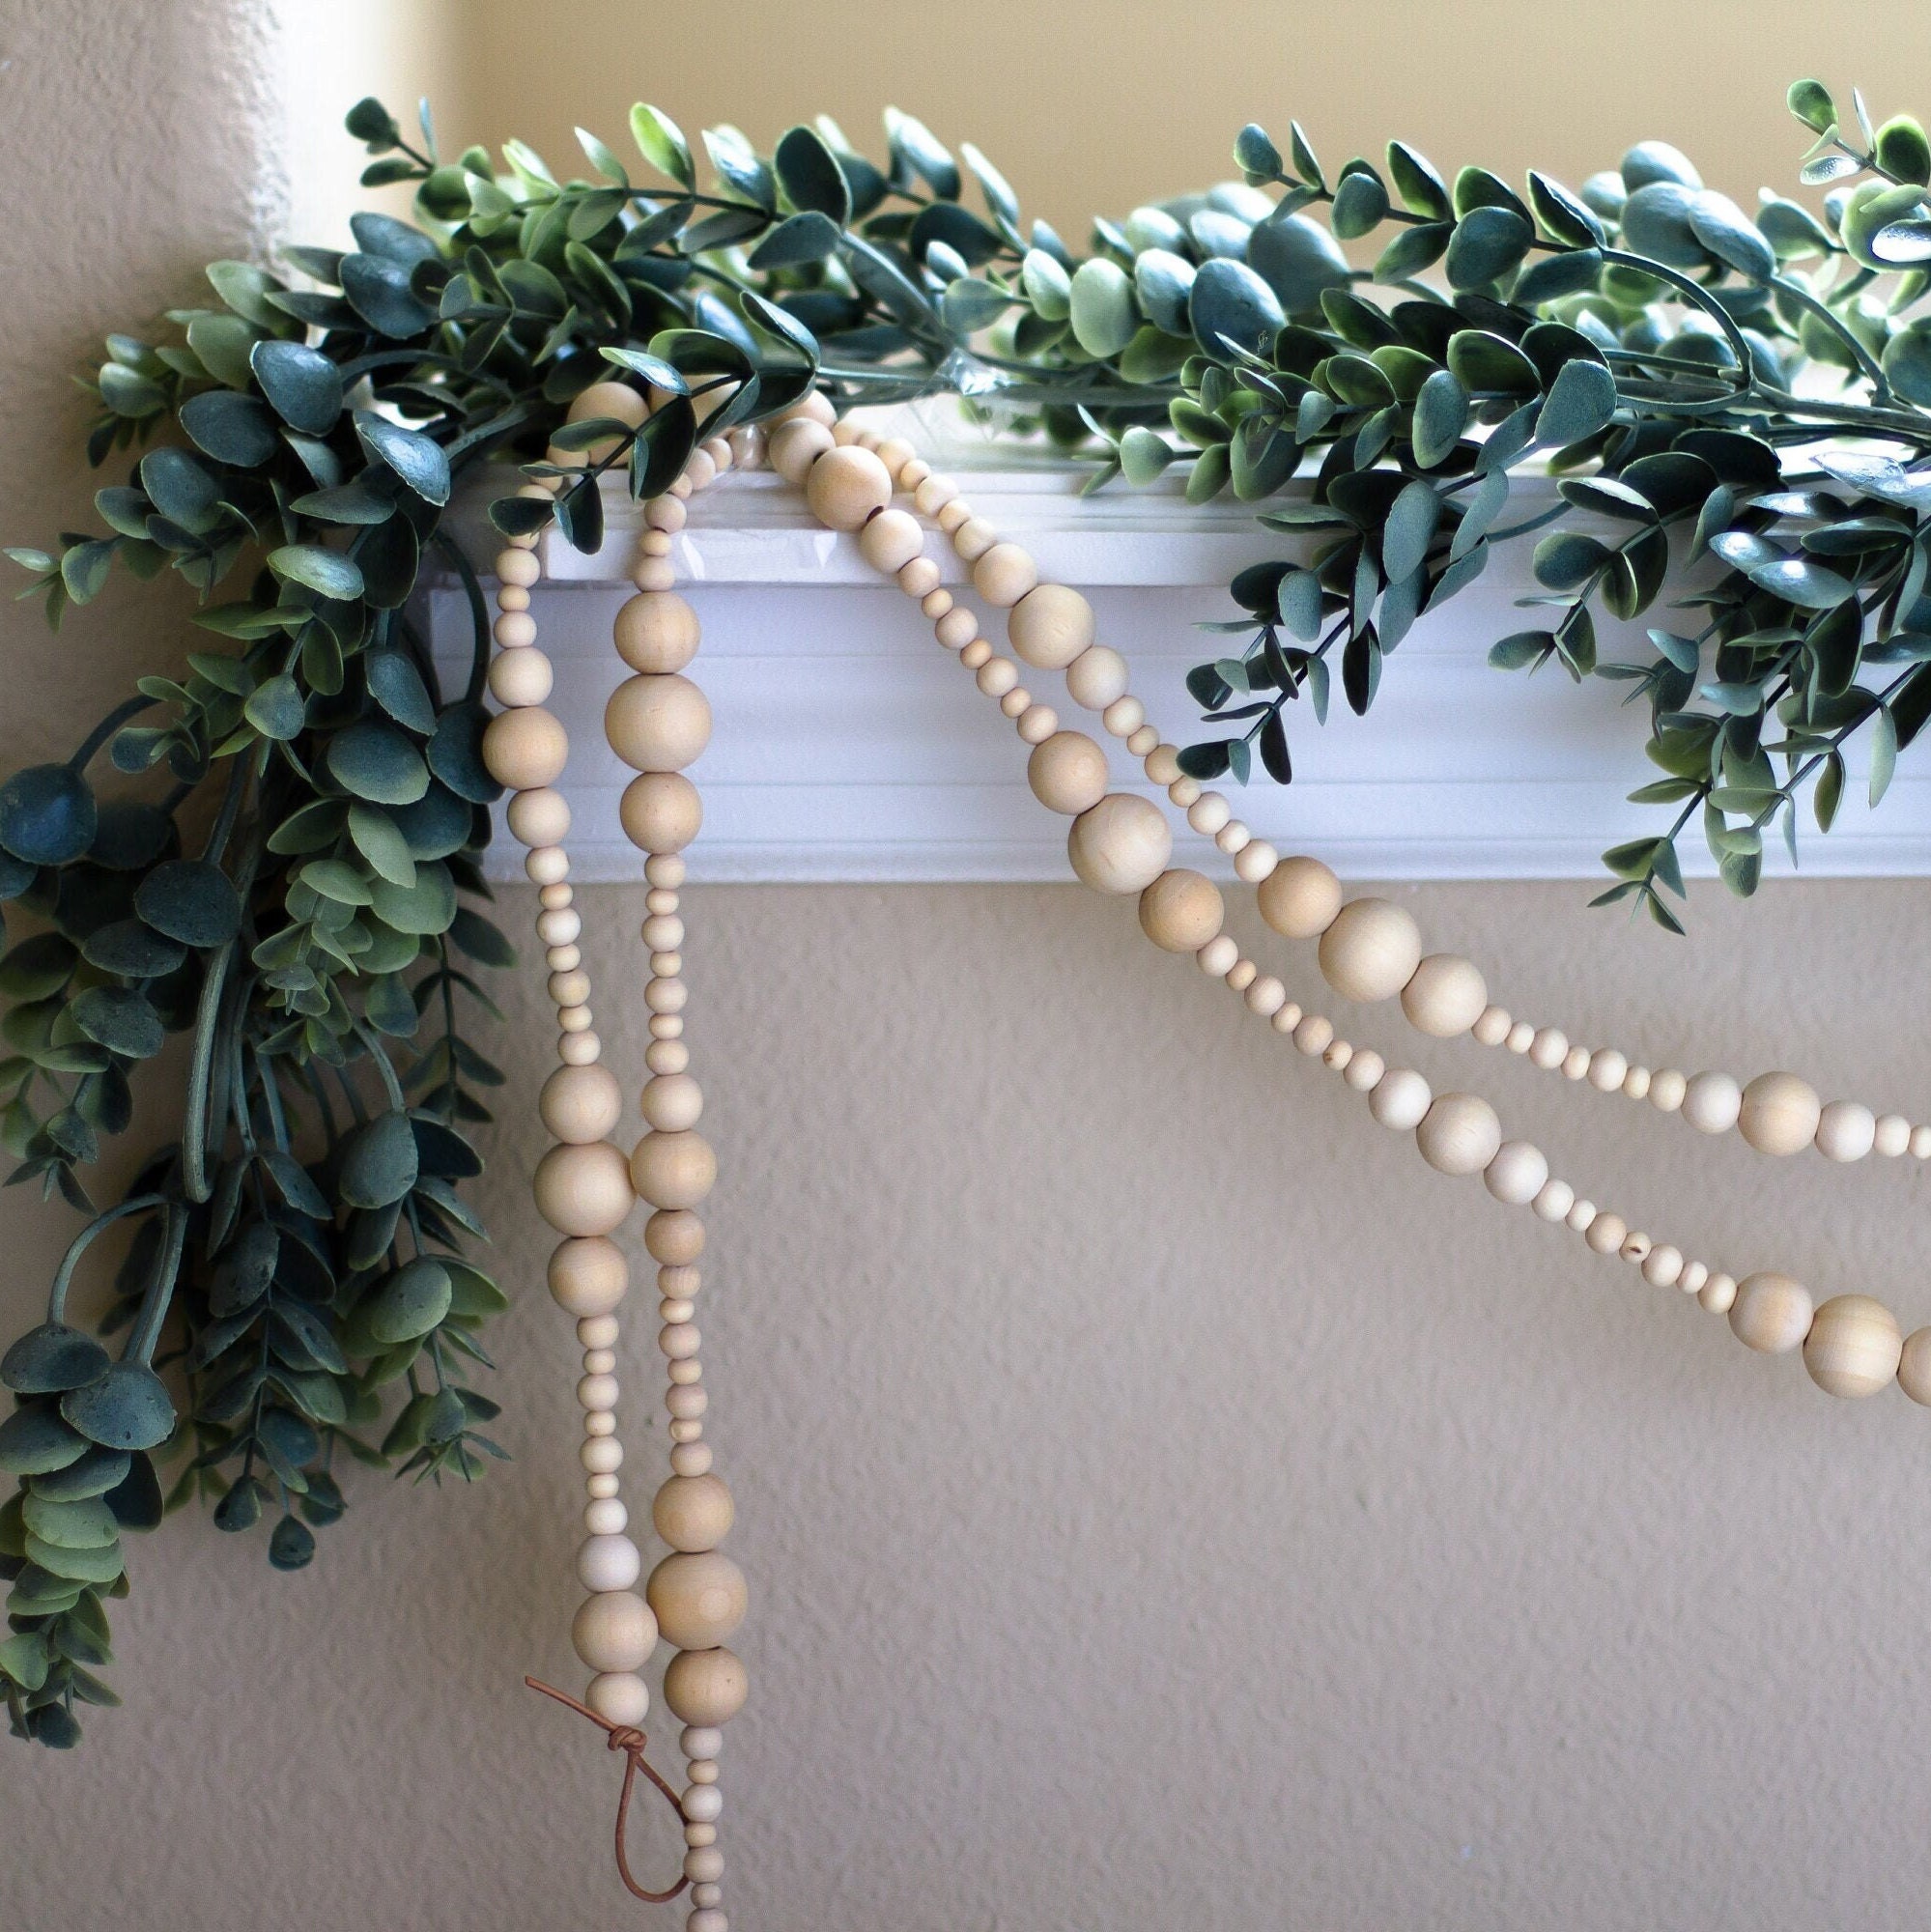 Wood Bead Christmas Garland - for Rustic, Natural, Scandinavian, Country,  or Farmhouse Decorations 3 Garlands 27 Feet Total by Factory Direct Craft